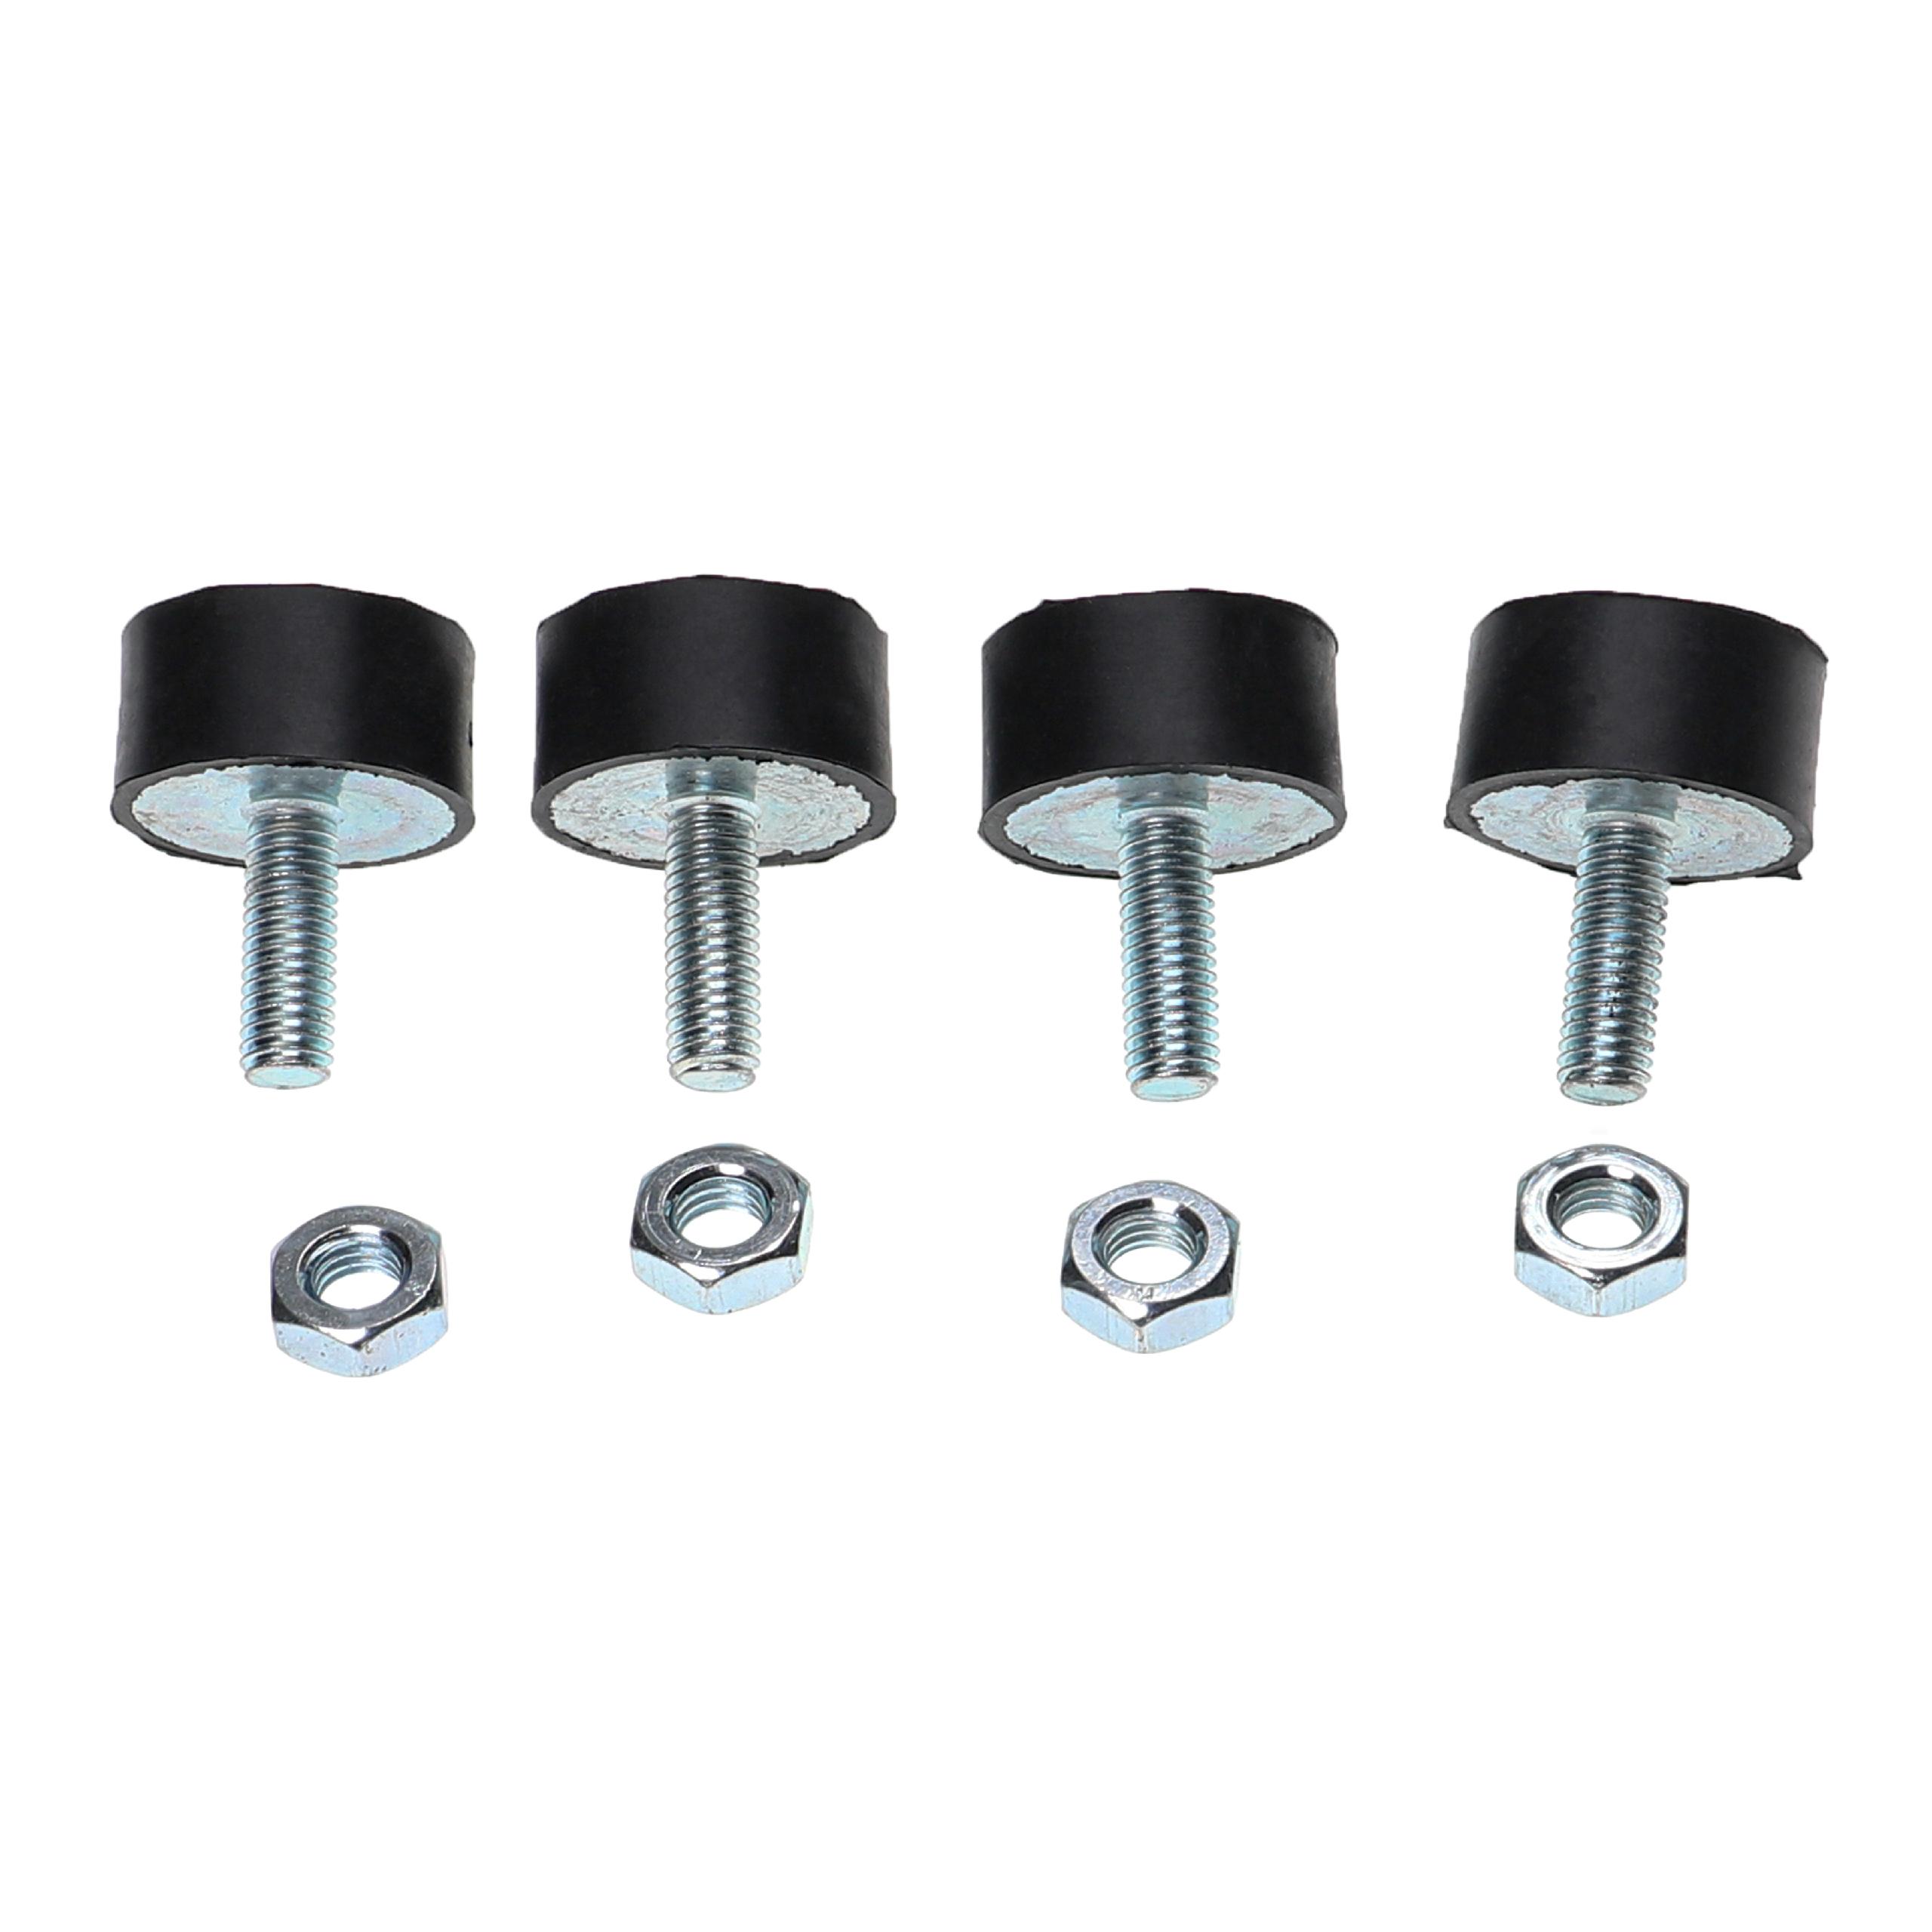 4x Vibration Dampers - Rubber Buffers M8